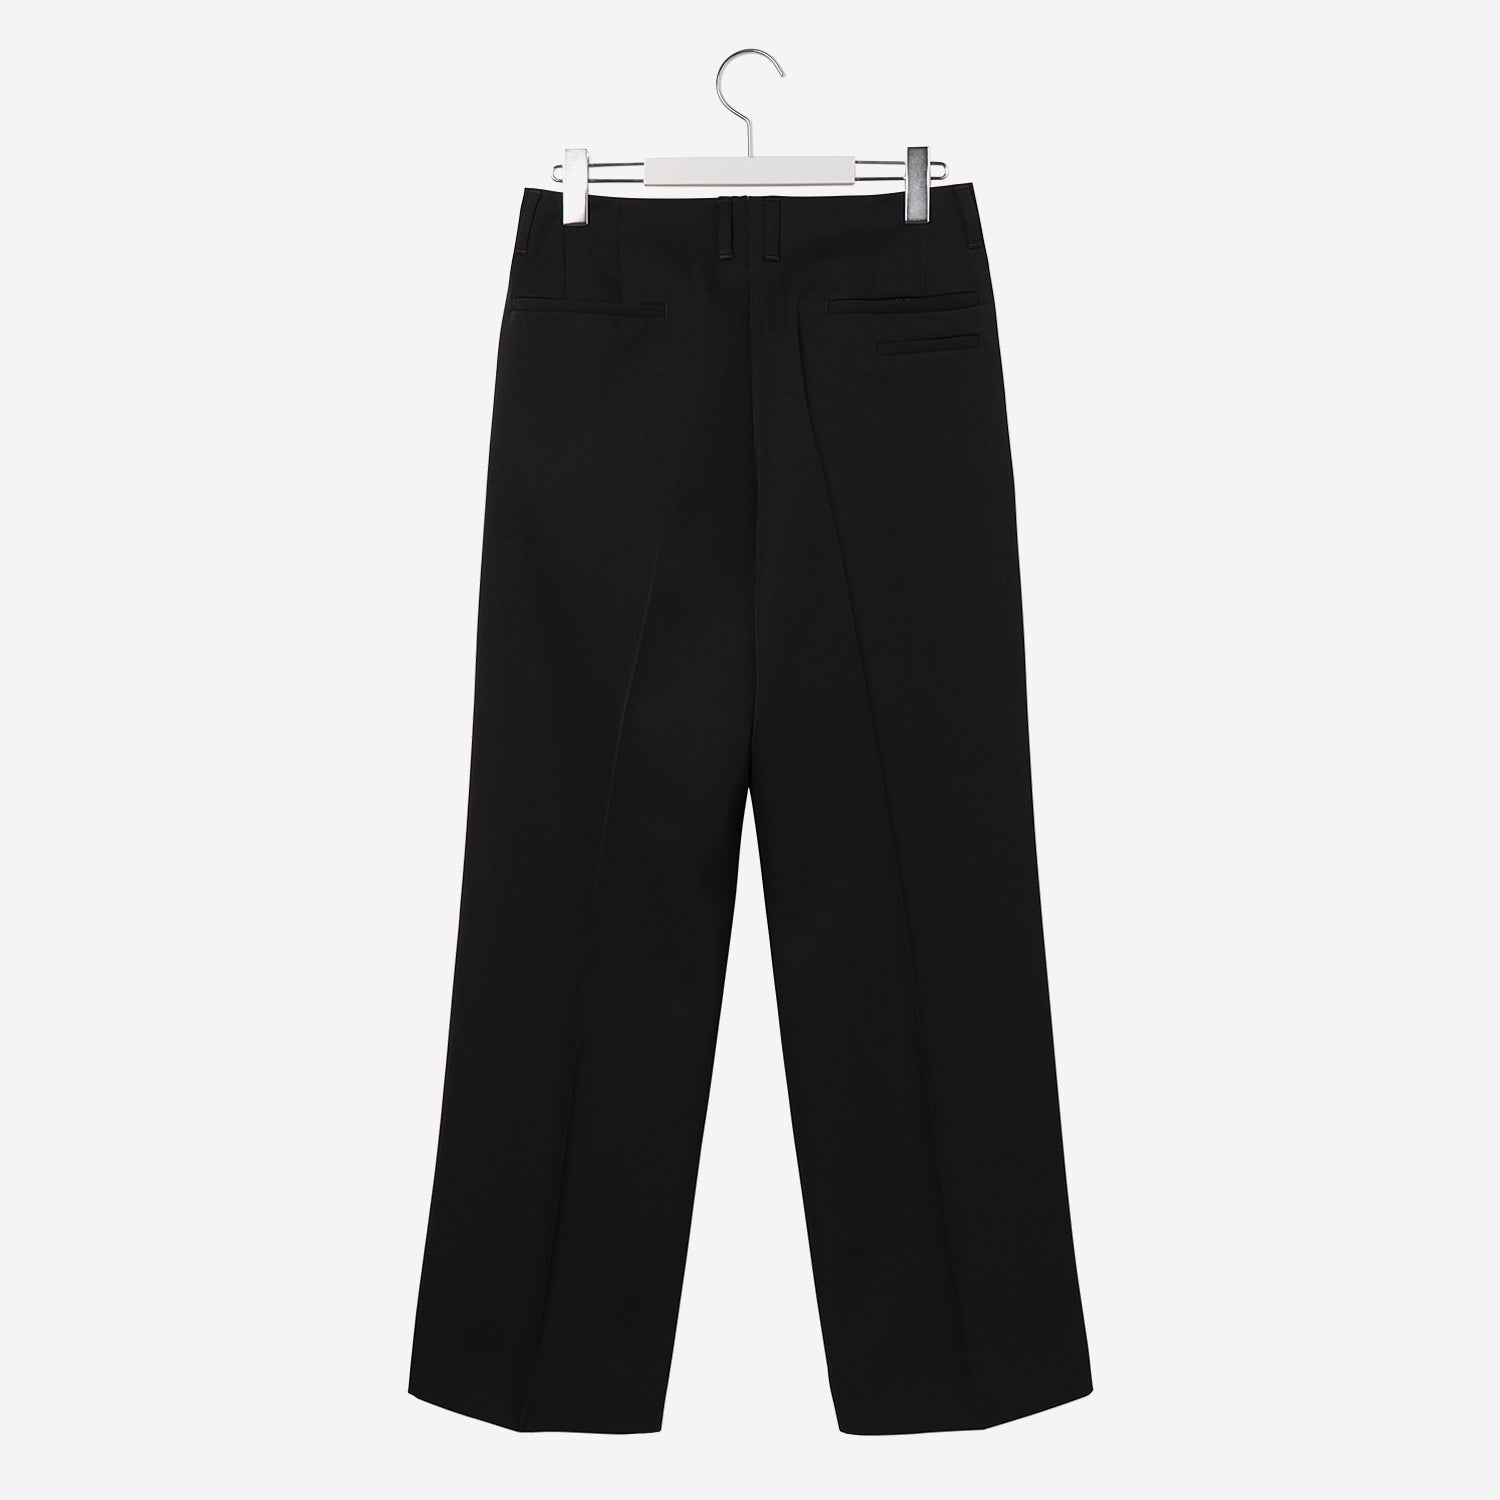 QUINN / Wide Tailored Pants / black – th products